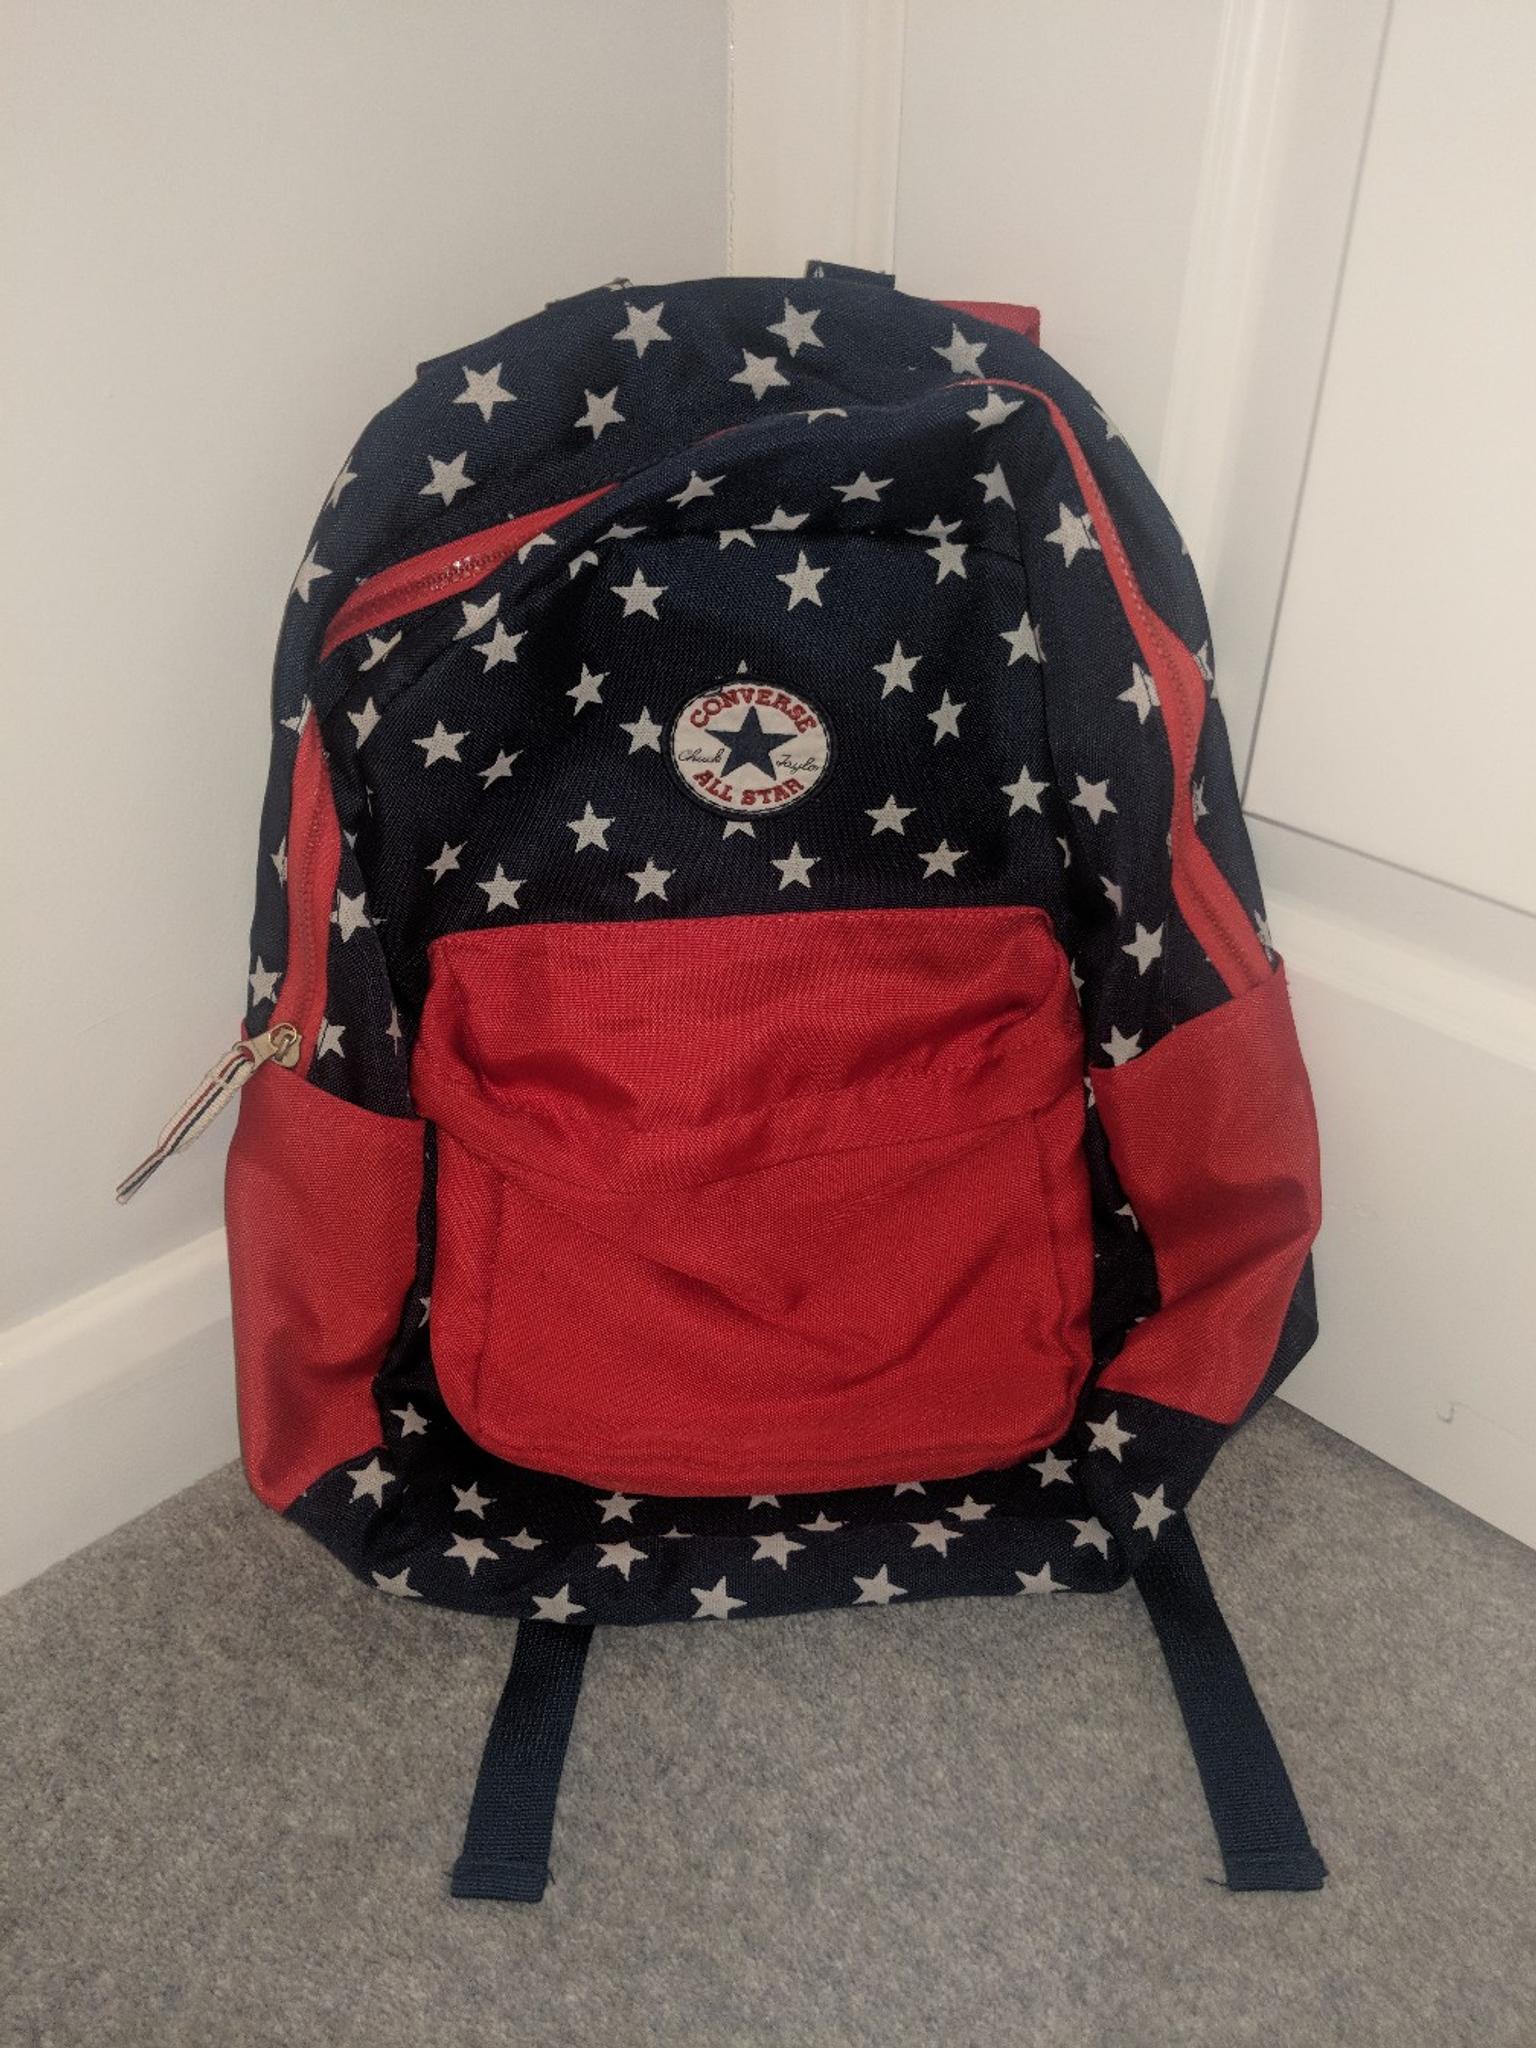 converse navy star backpack